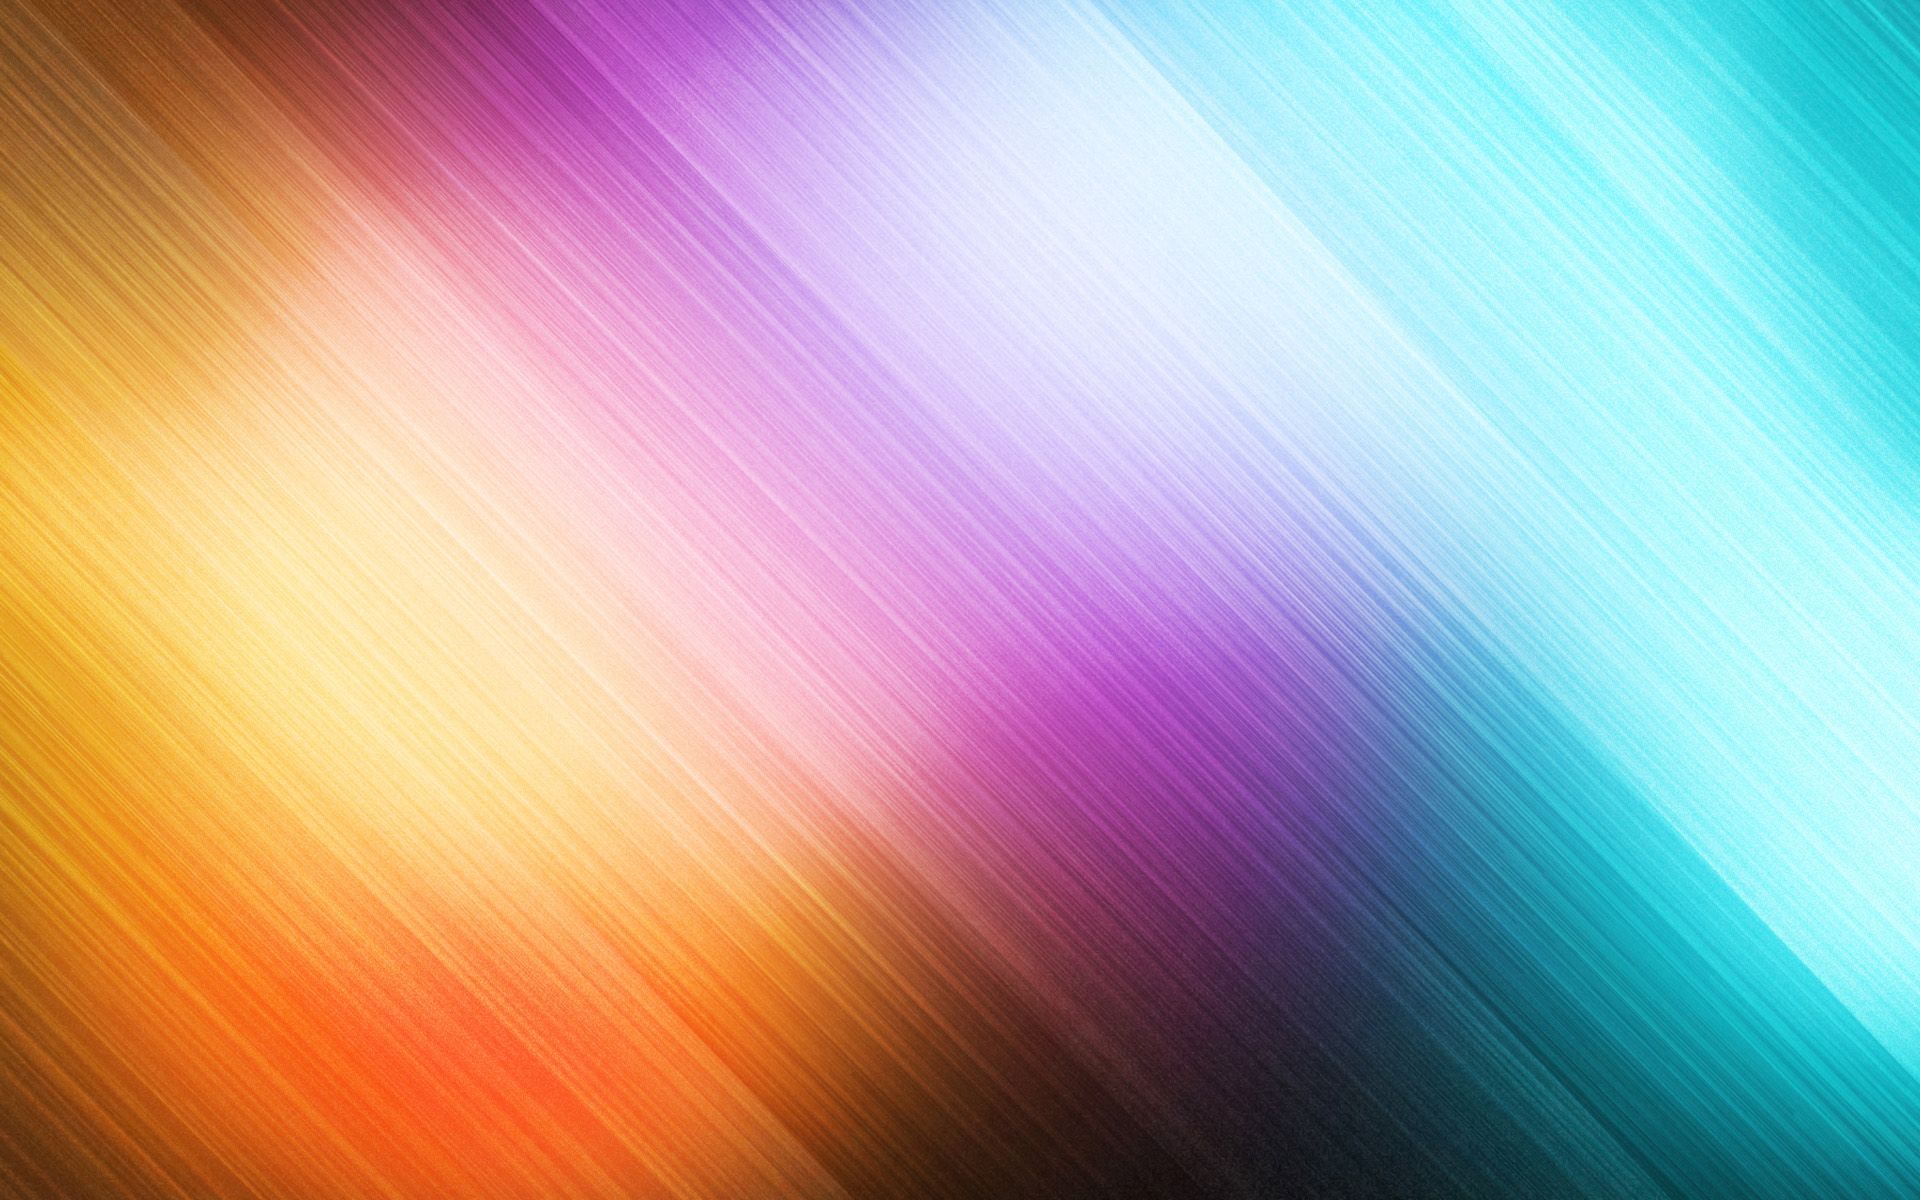 Colored Wallpapers Group with 37 items